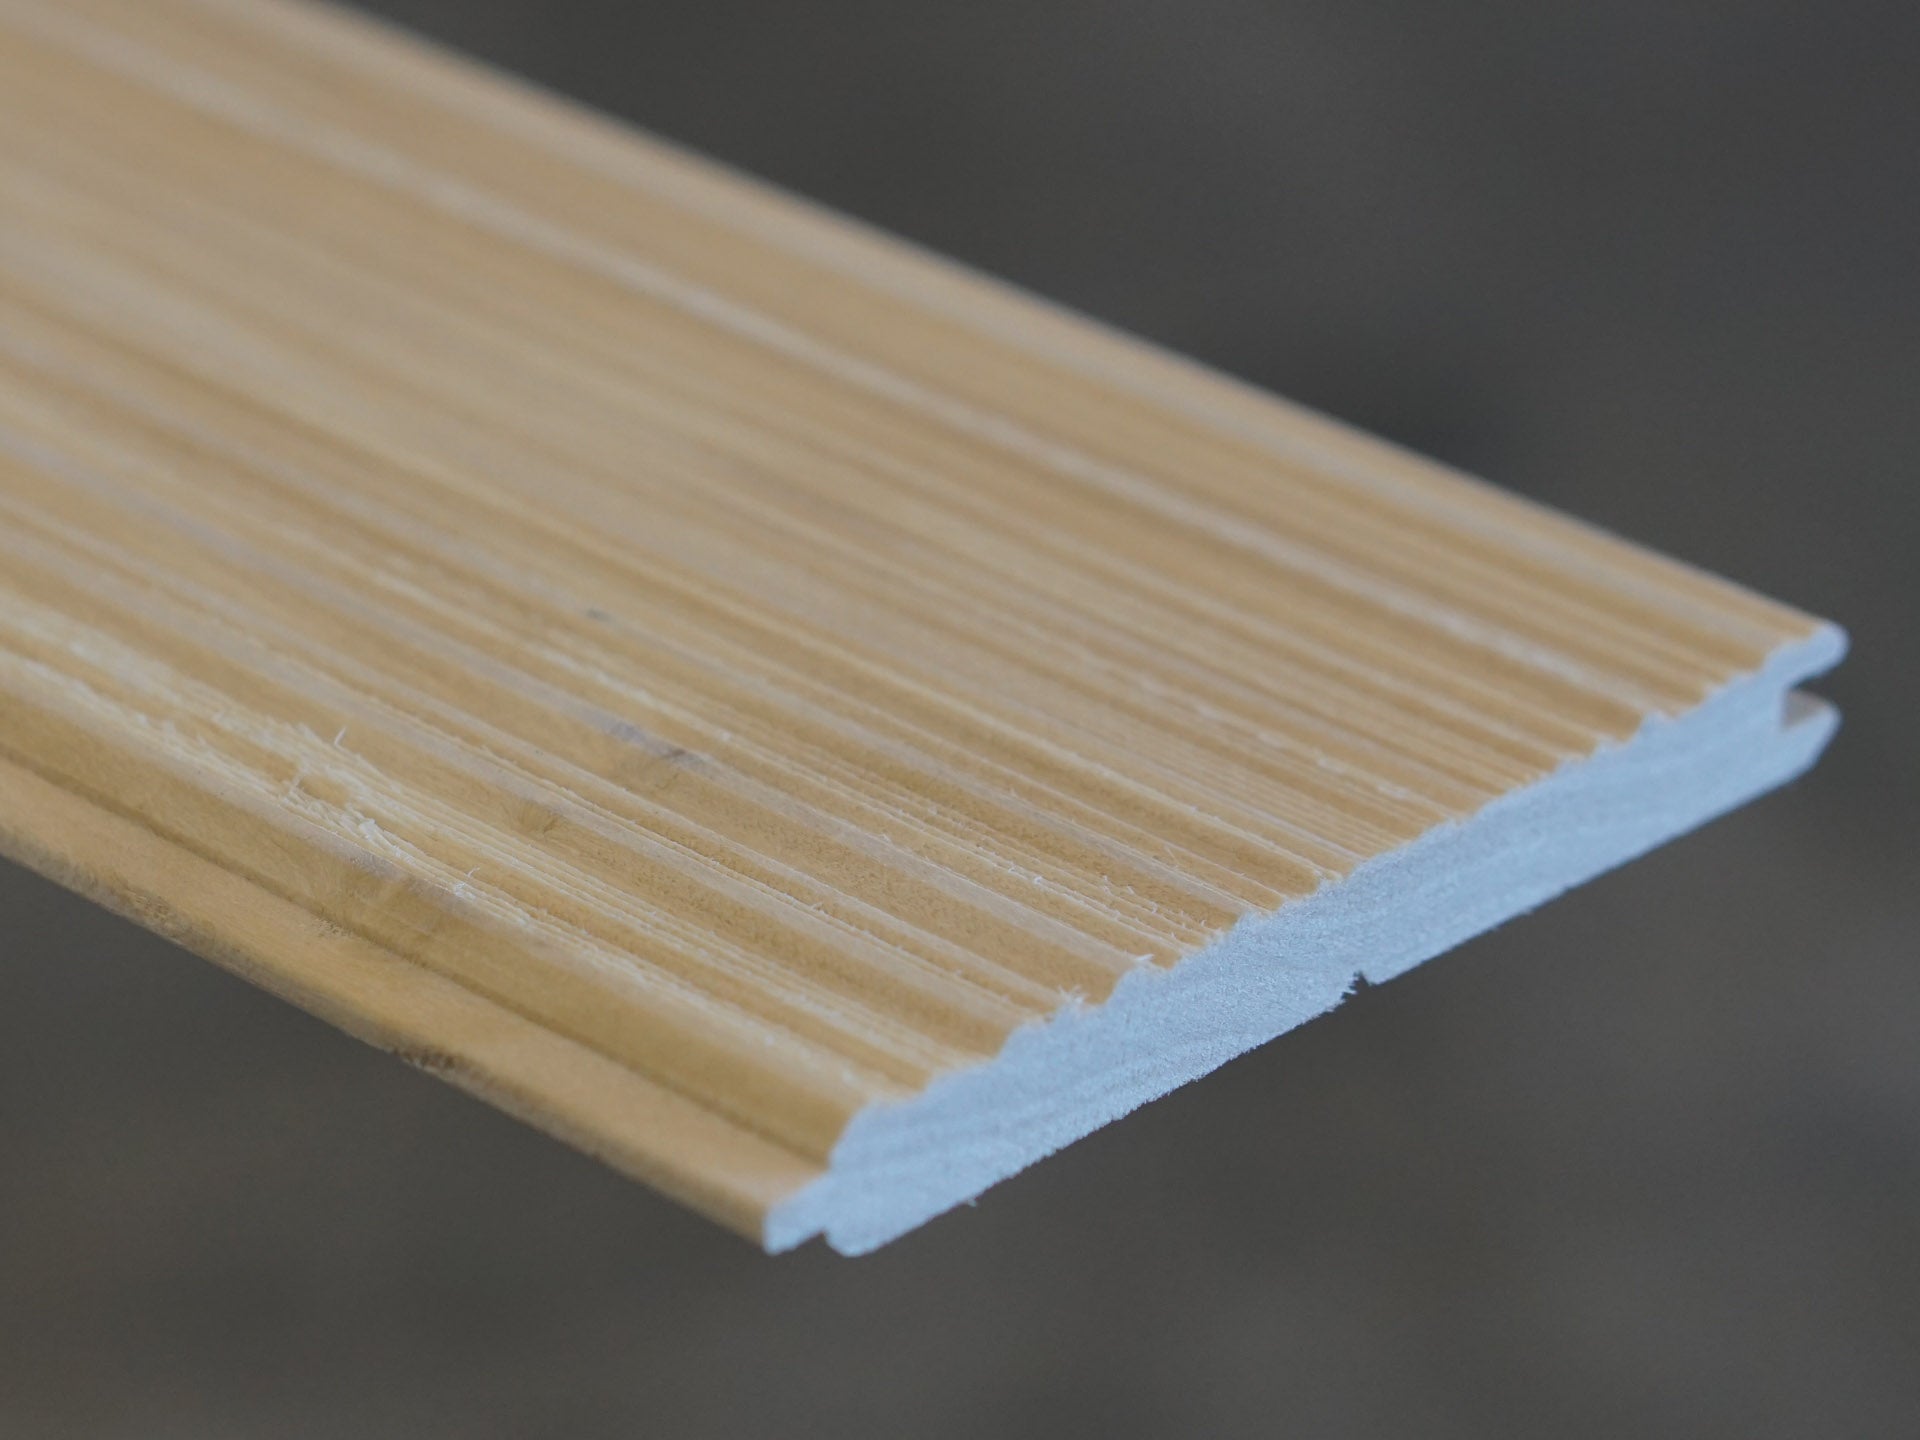 Close up of Weldtex tongue & groove poplar hardwood plank consisting of a combed, striated, brushed wood appearance common in mid-century modern homes and design